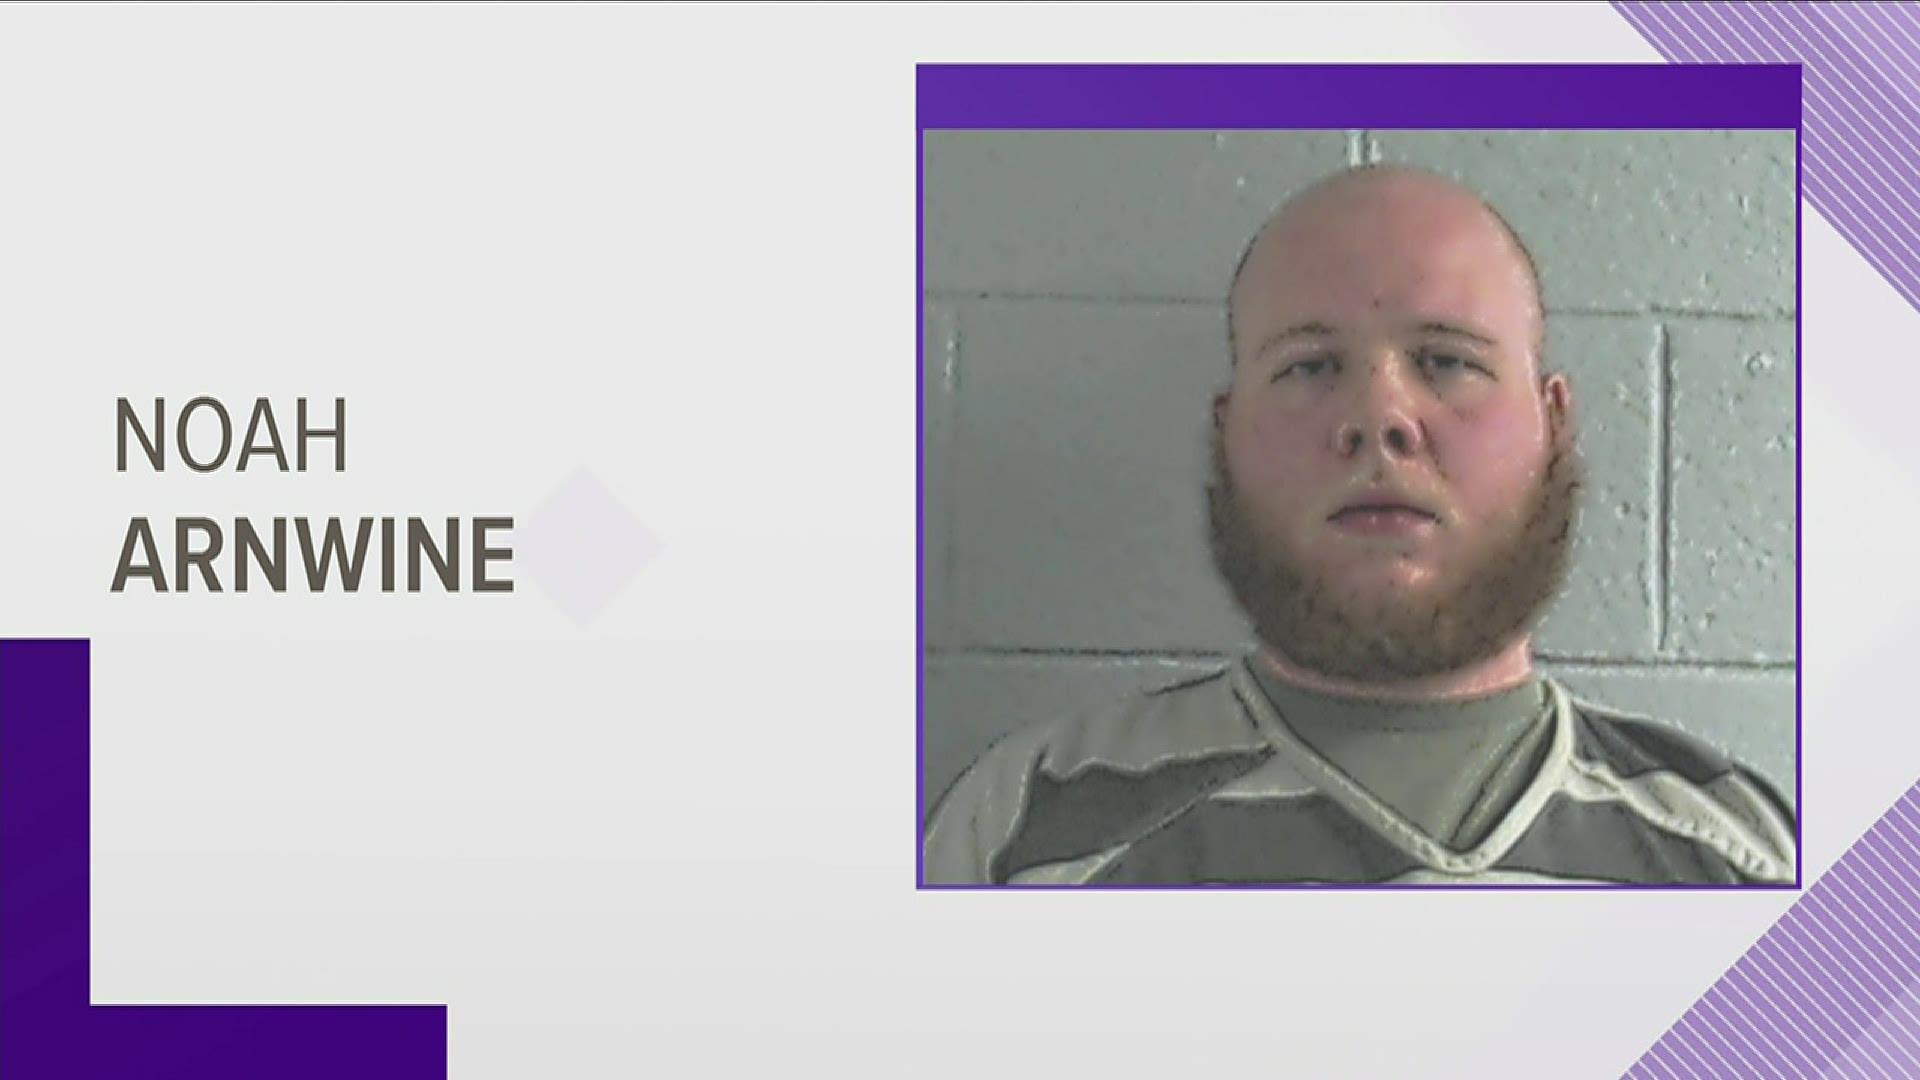 A former Claiborne County Sheriff's Deputy turned himself in after investigators say he played "Russian roulette" with a gun while in a patrol car on I-75.